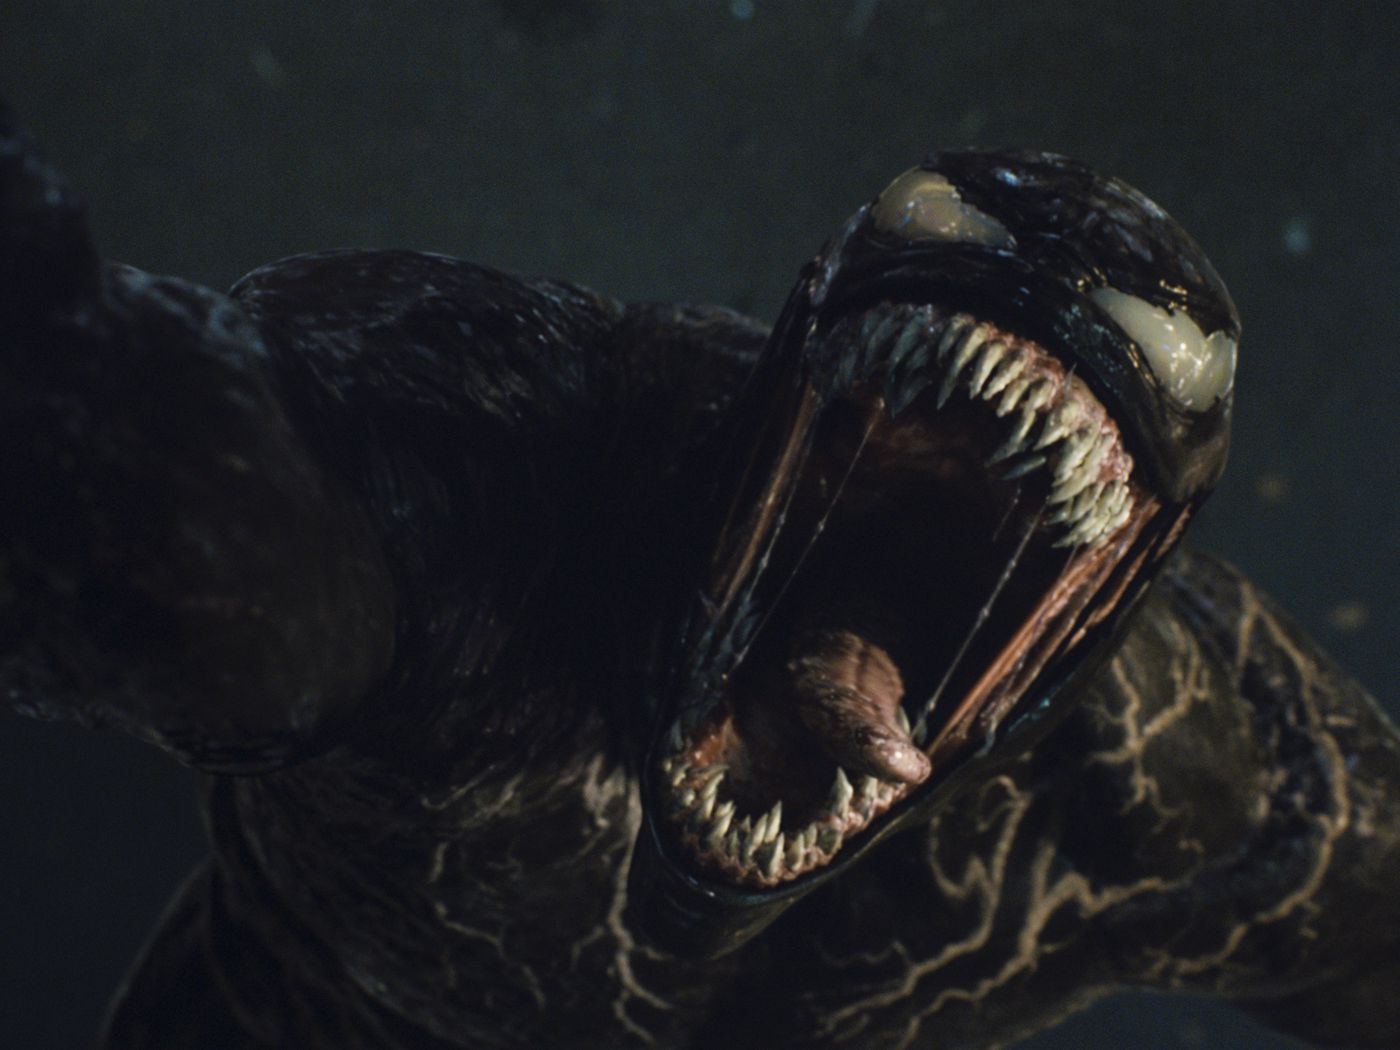 Venom 2 review: Tom Hardy chews up every bit of Let There Be Carnage